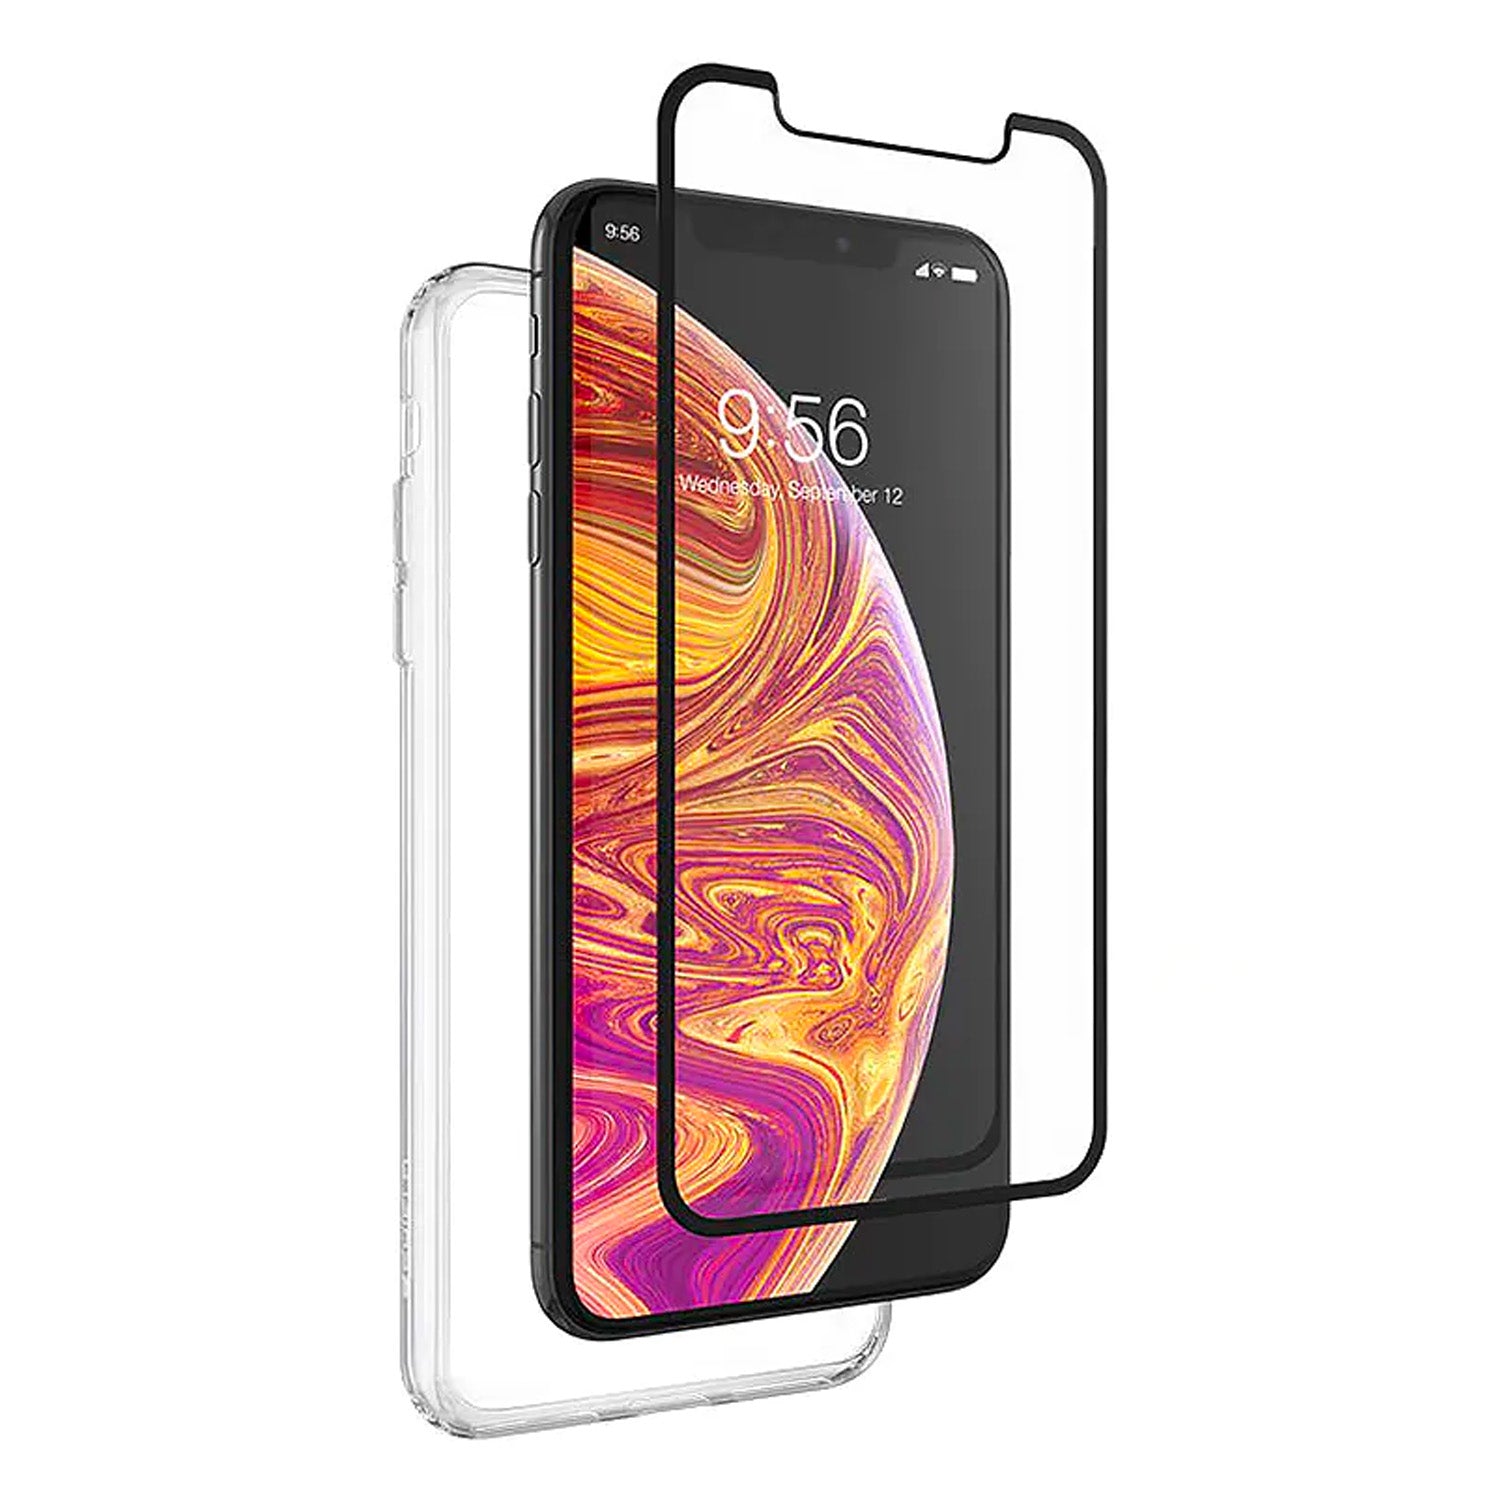 ZAGG Invisible Shield iPhone Xs Max 360 Protection Case + Glass Curve Screen Protector